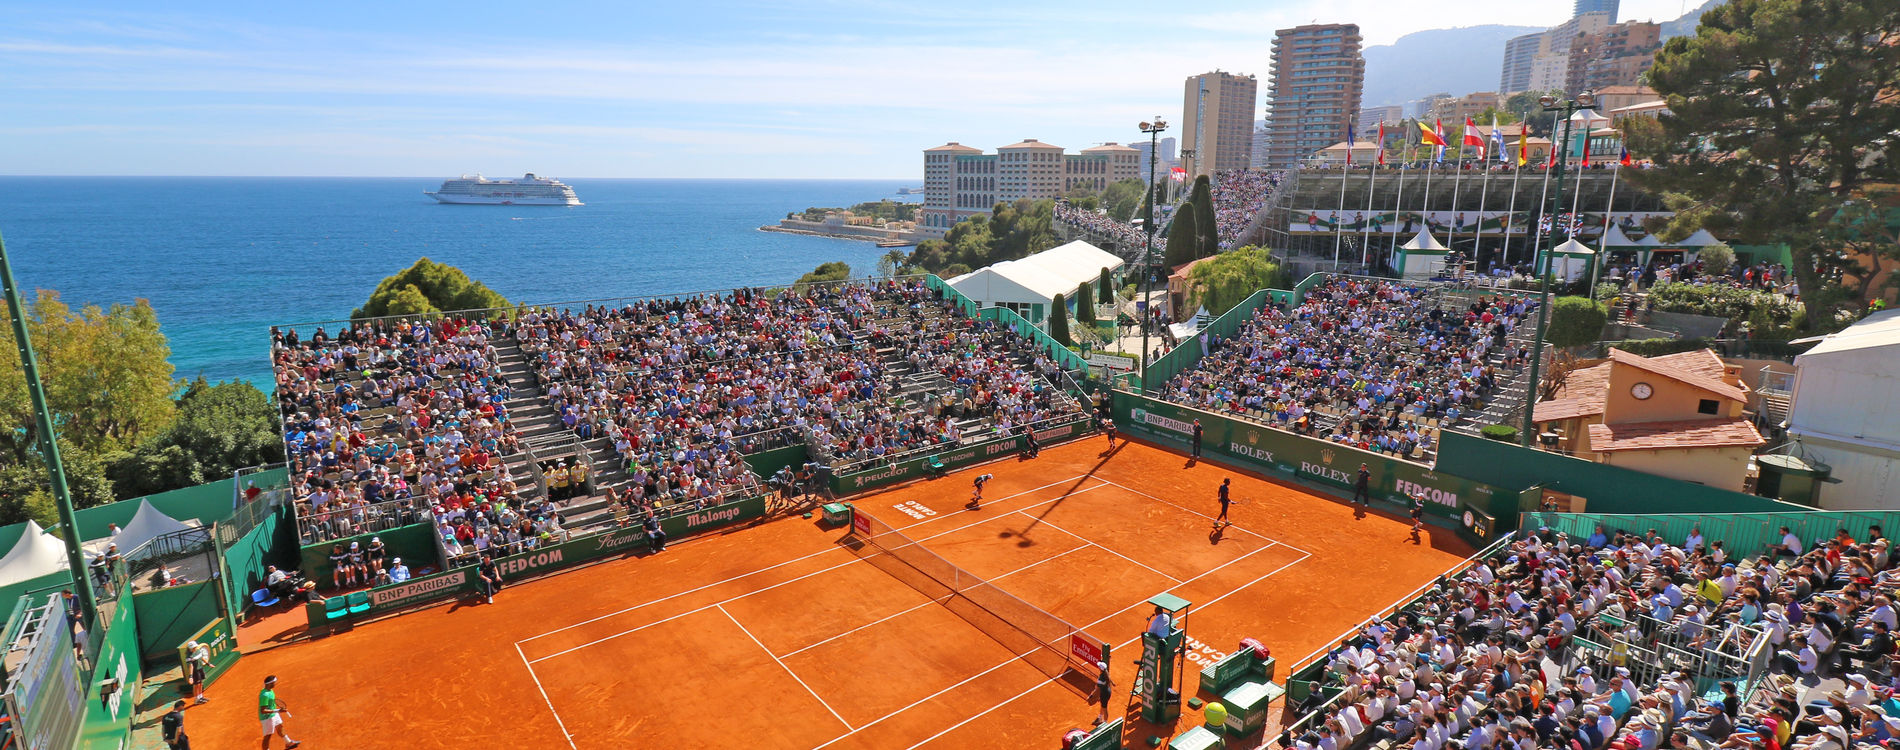 Monte-Carlo Rolex Masters Among the Most Famous and Prestigious Tennis Tournaments on Clay